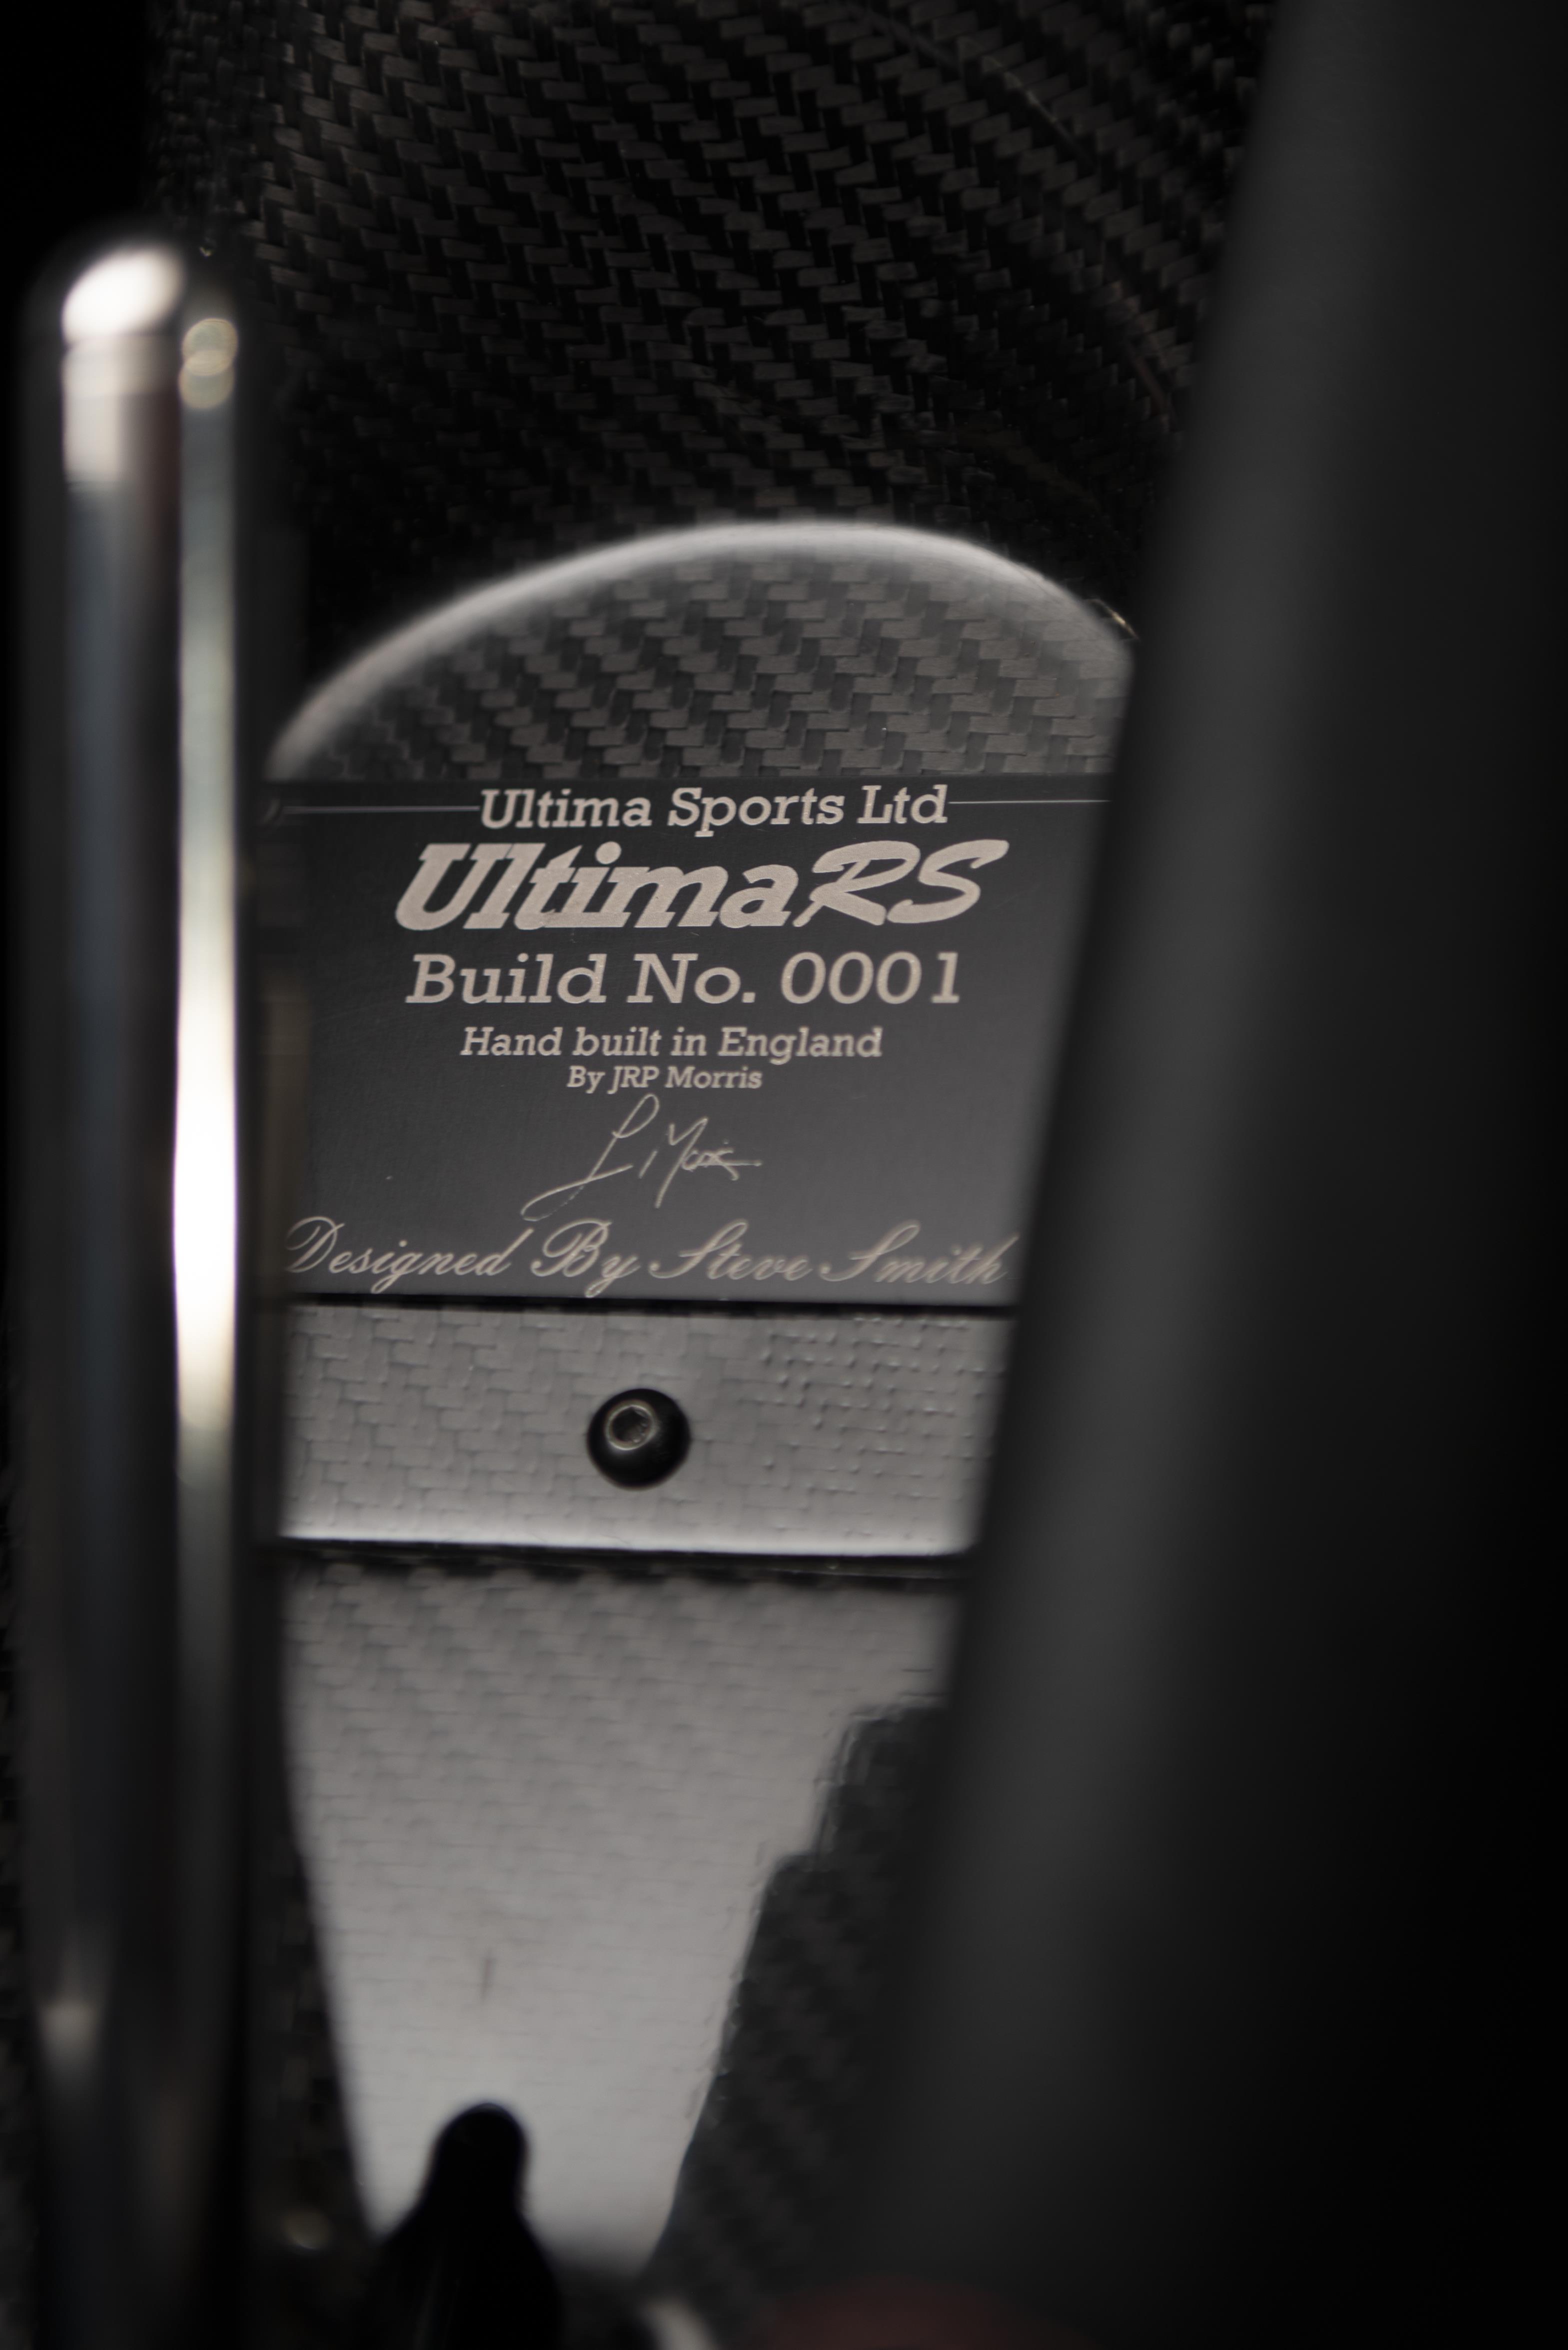 Welcome to the new Ultima RS